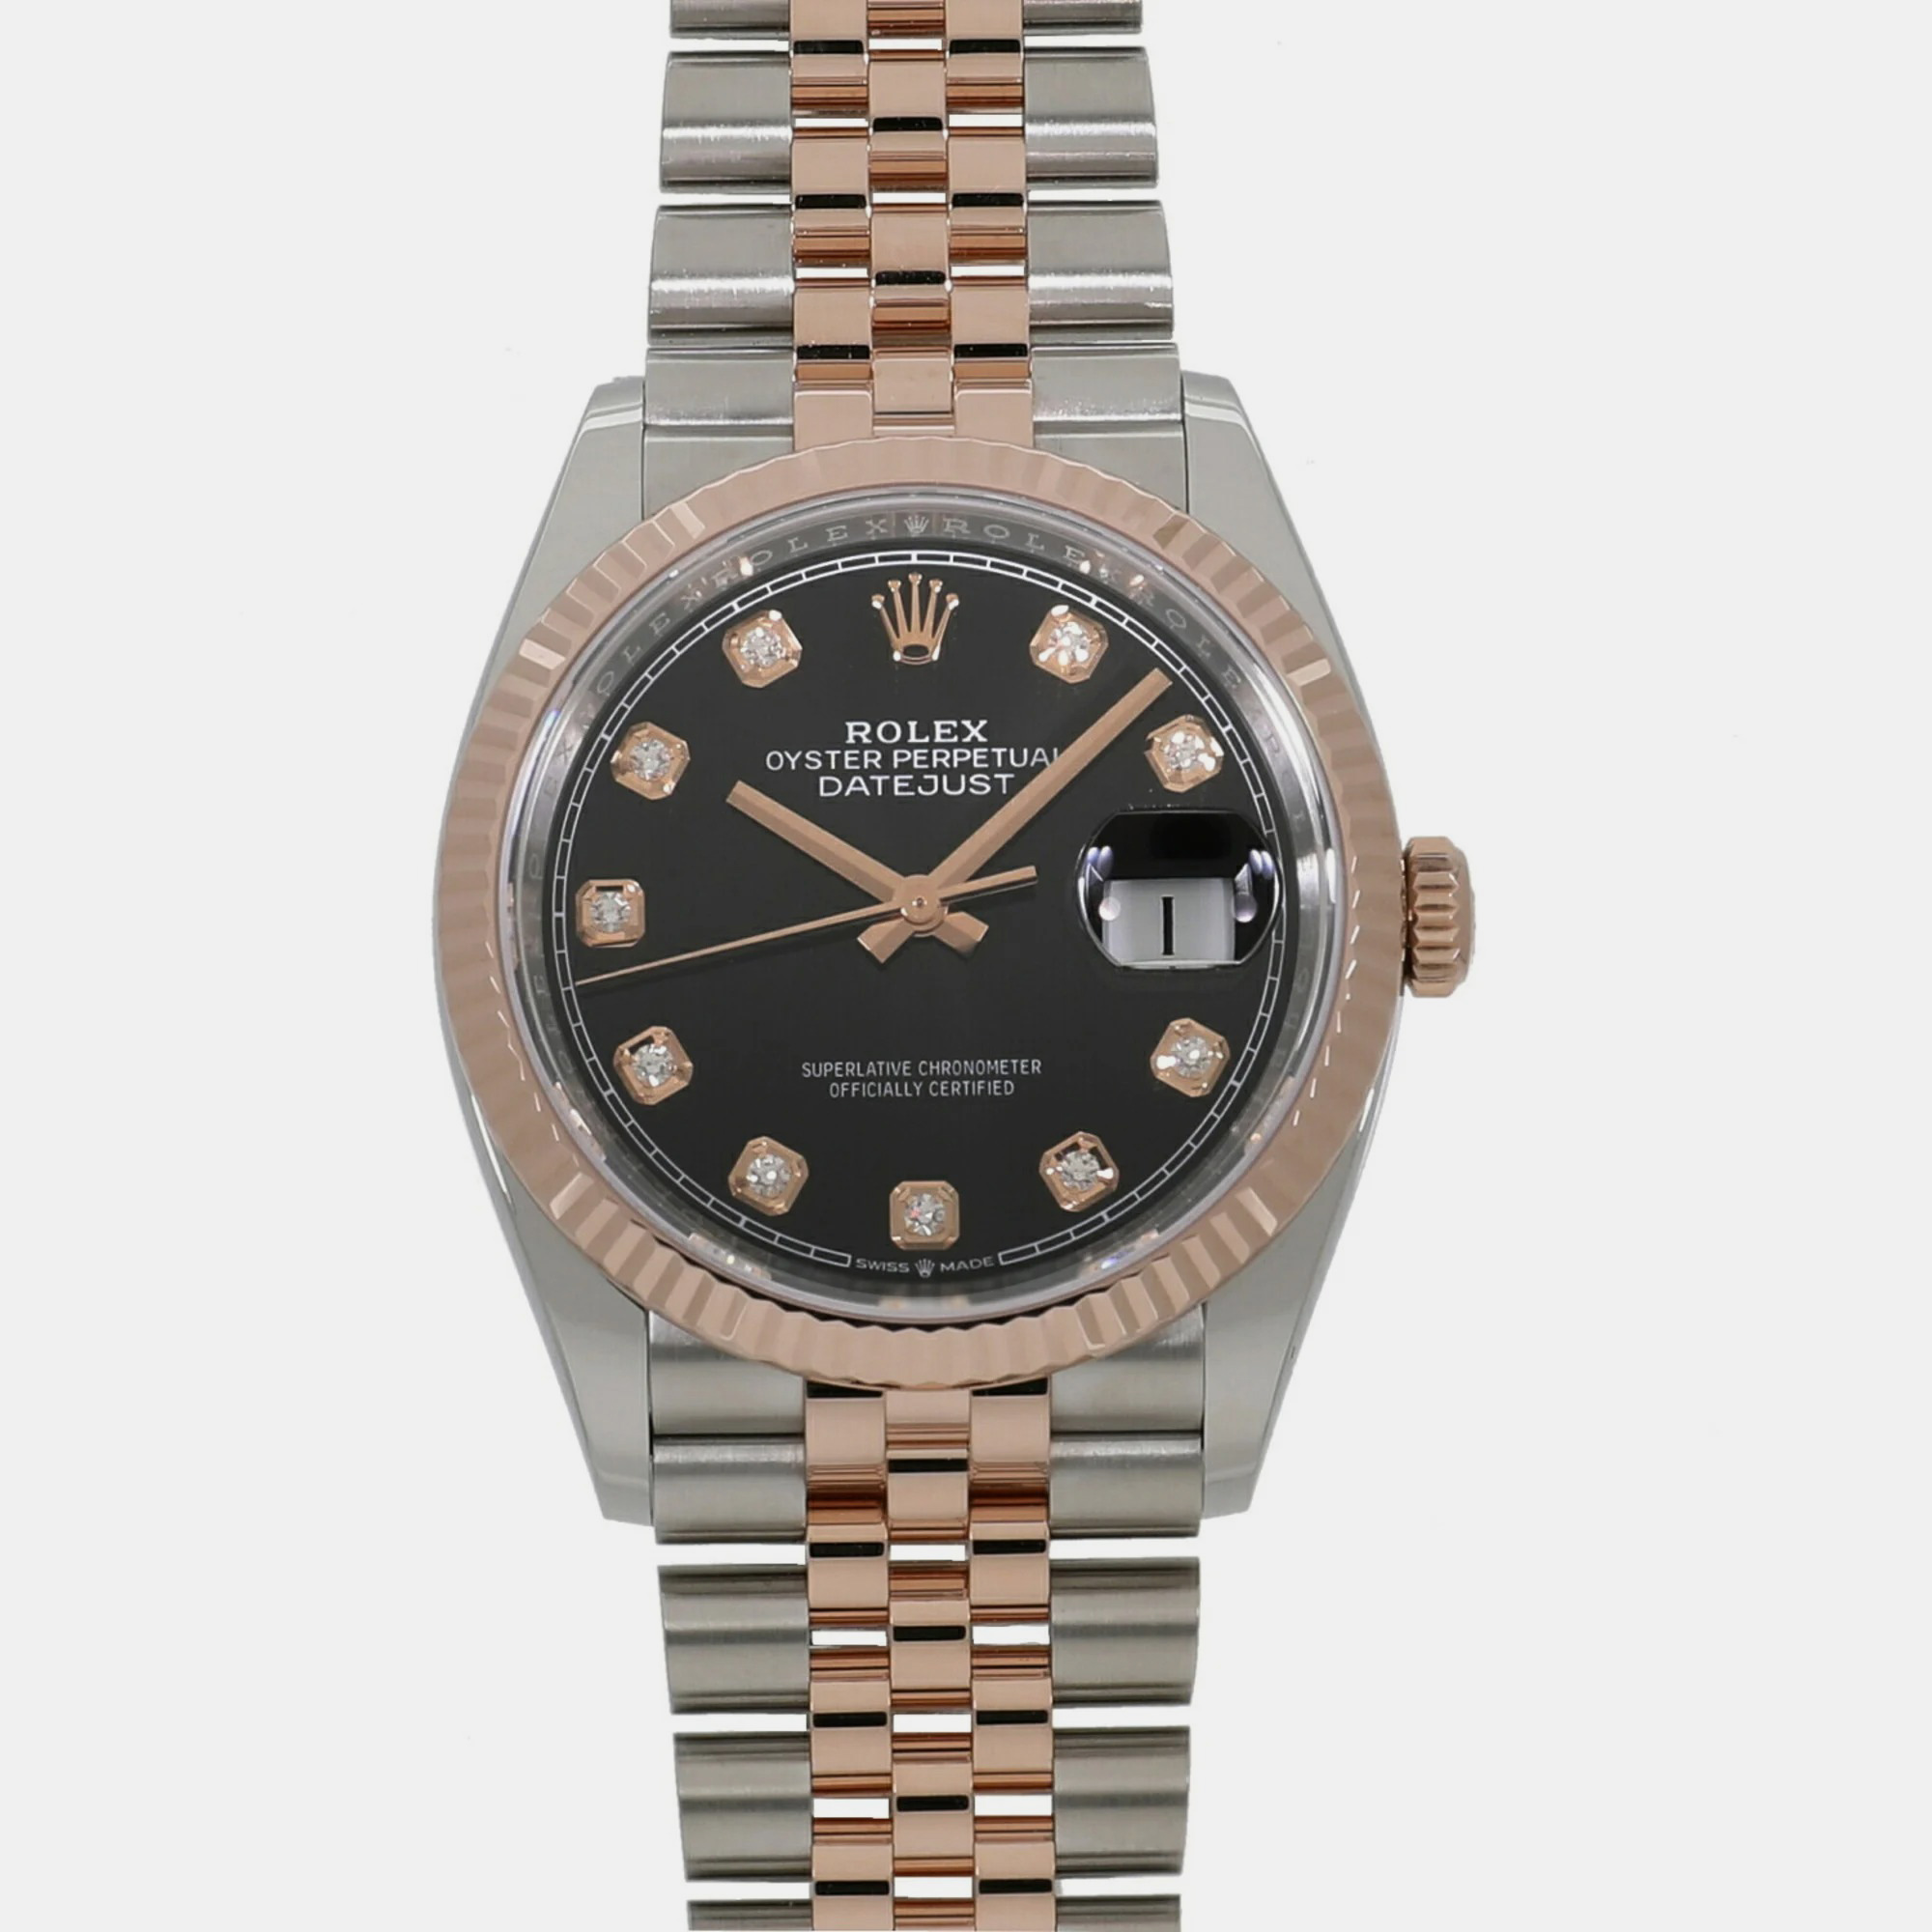 Rolex Black Diamond 18k Rose Gold And Stainless Steel Datejust 126231 Automatic Men's Wristwatch 36 Mm